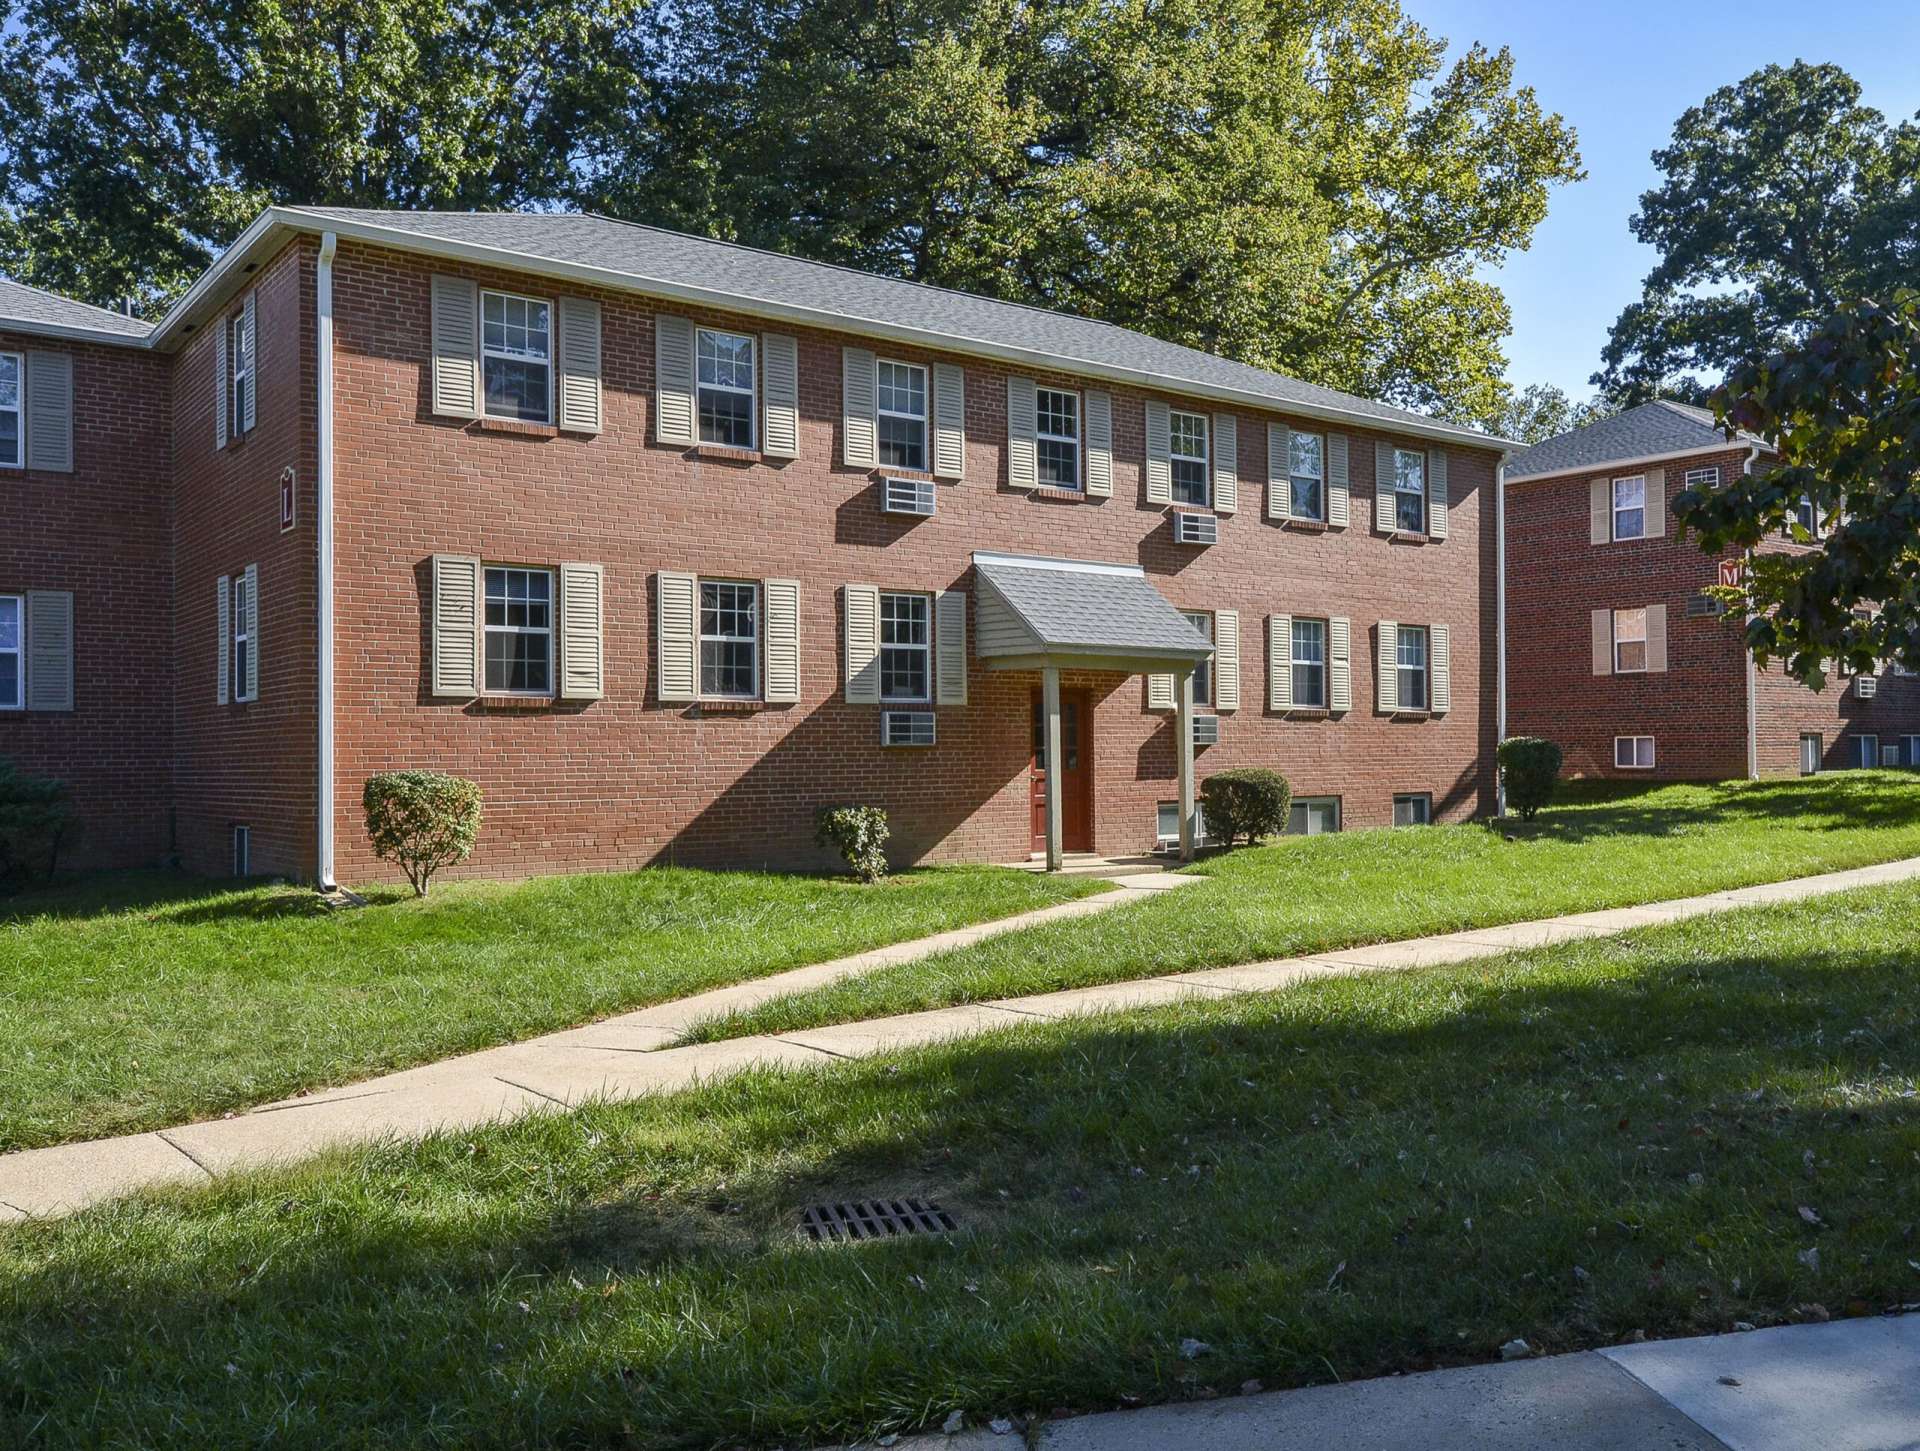 Knollwood apartment buildings with grass and sidewalks in front of them.